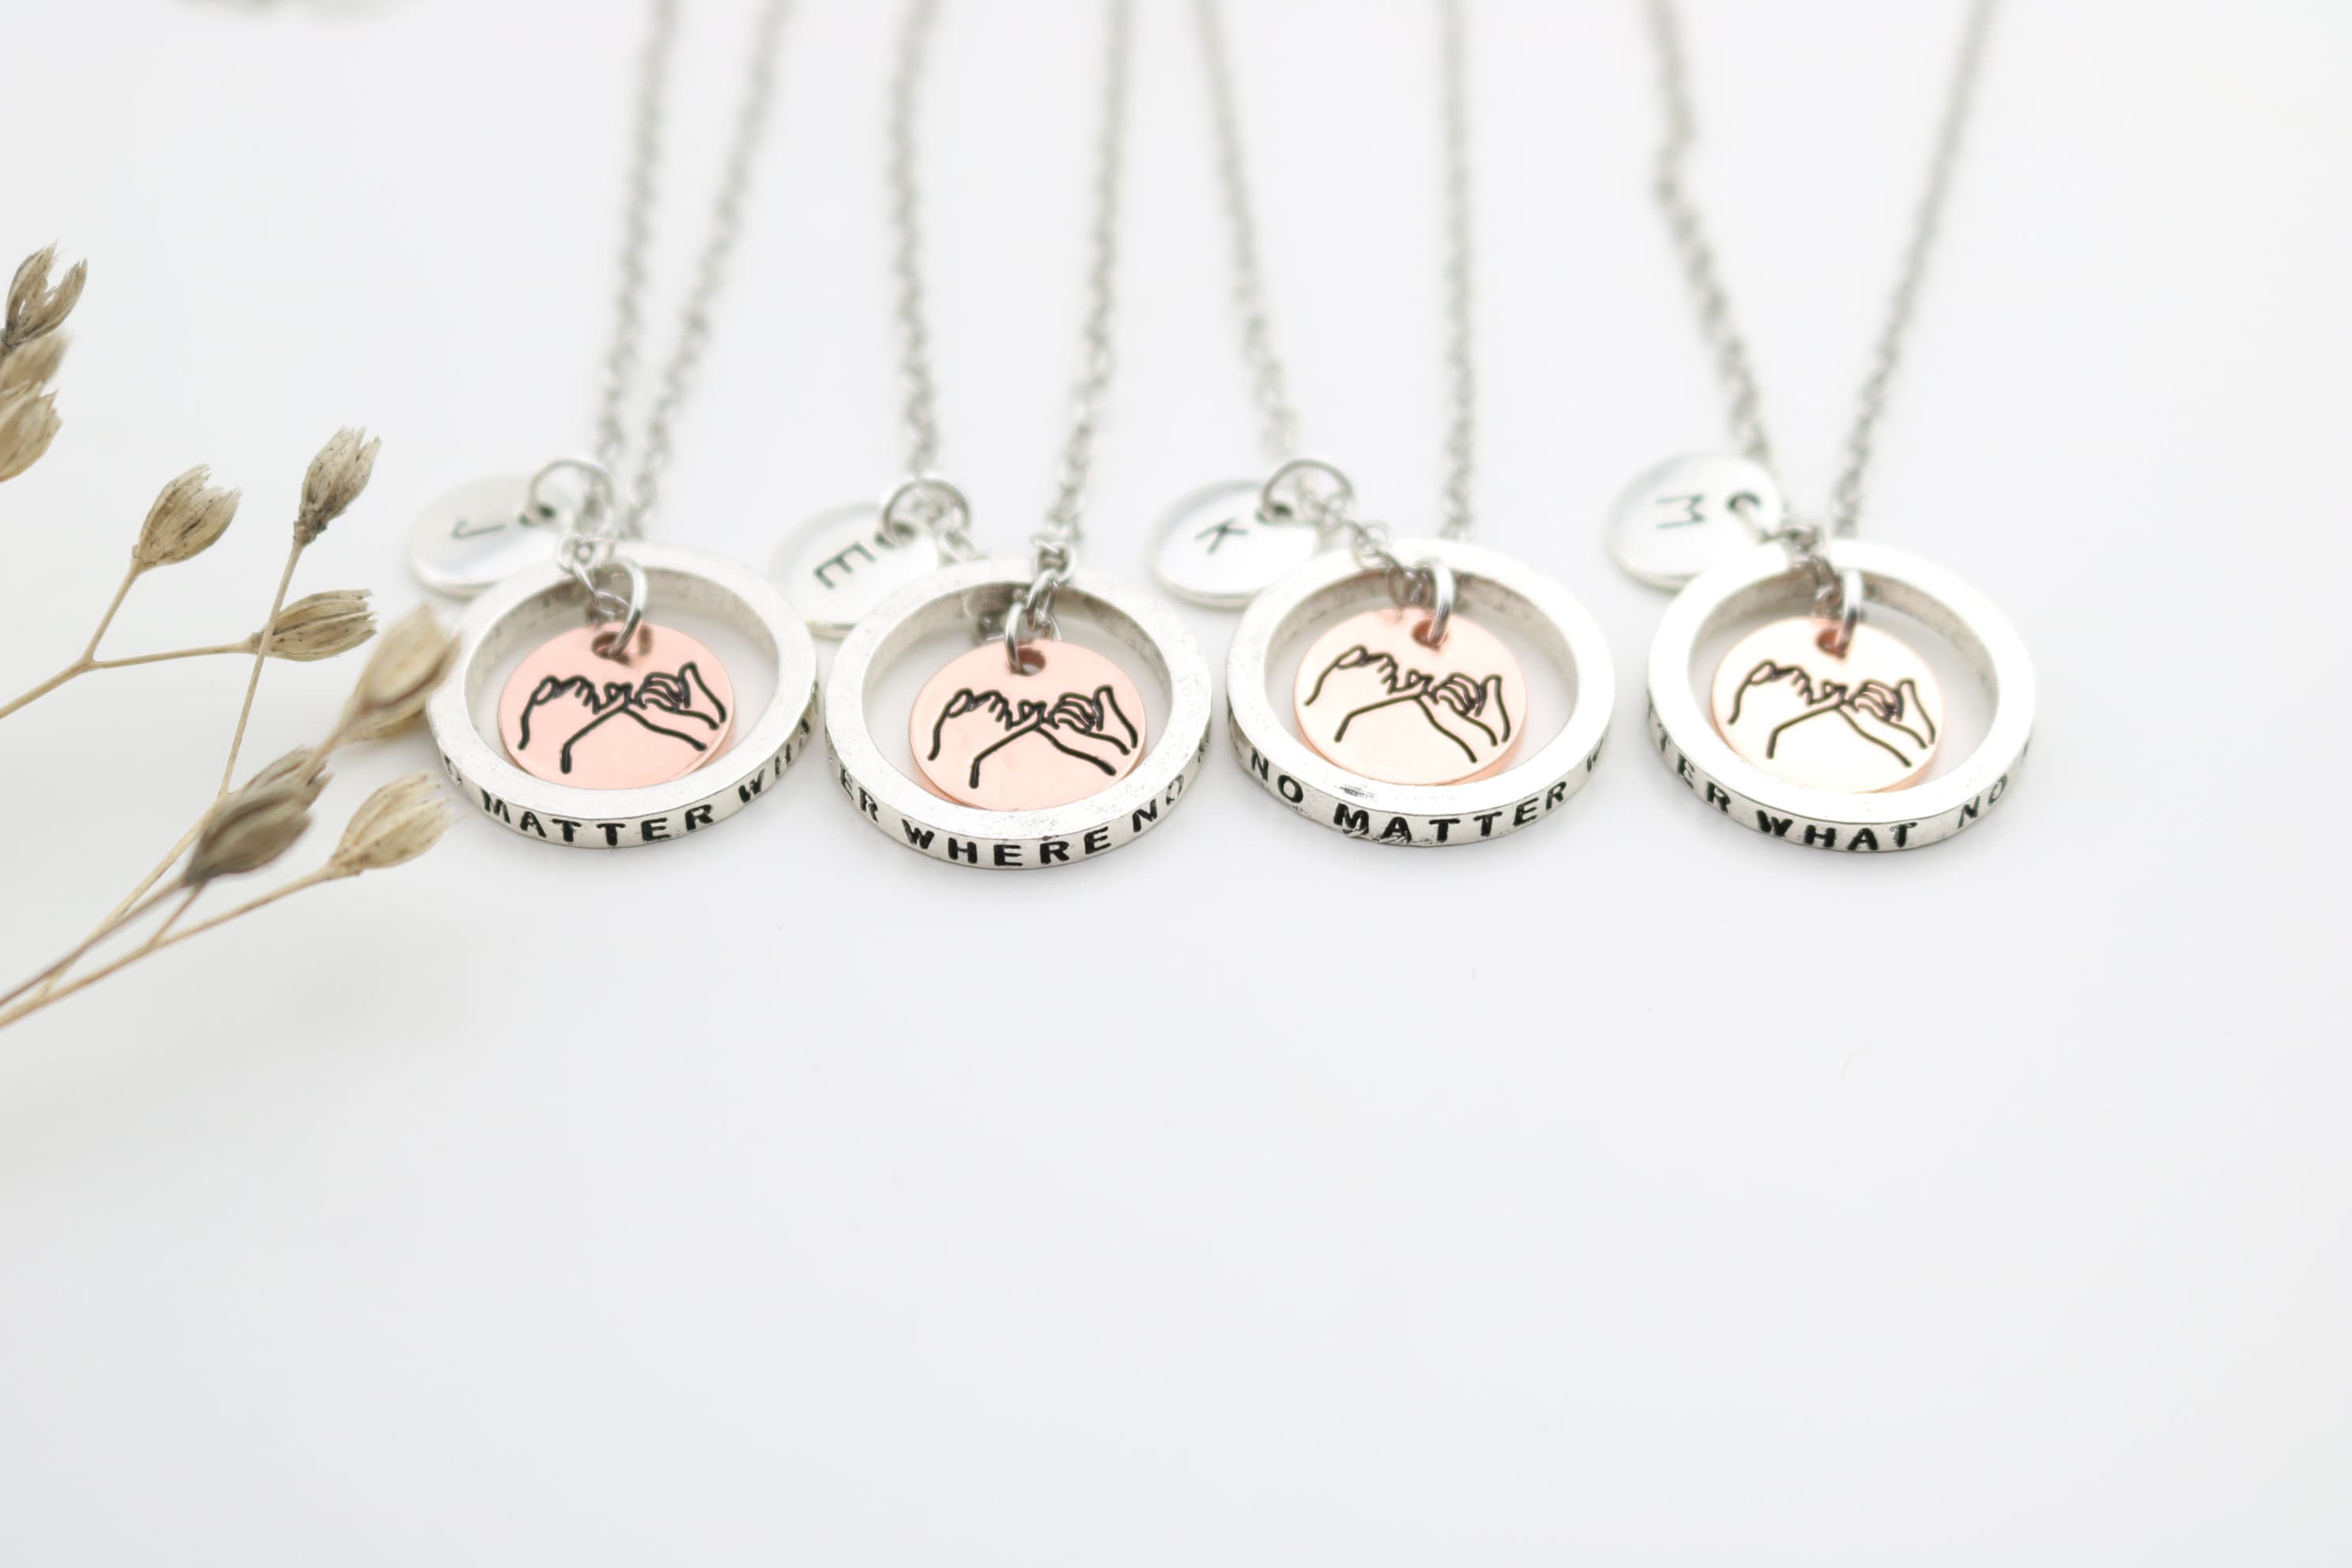 Couples Necklace Best Friend Friendship Matching Dog Tag Necklaces